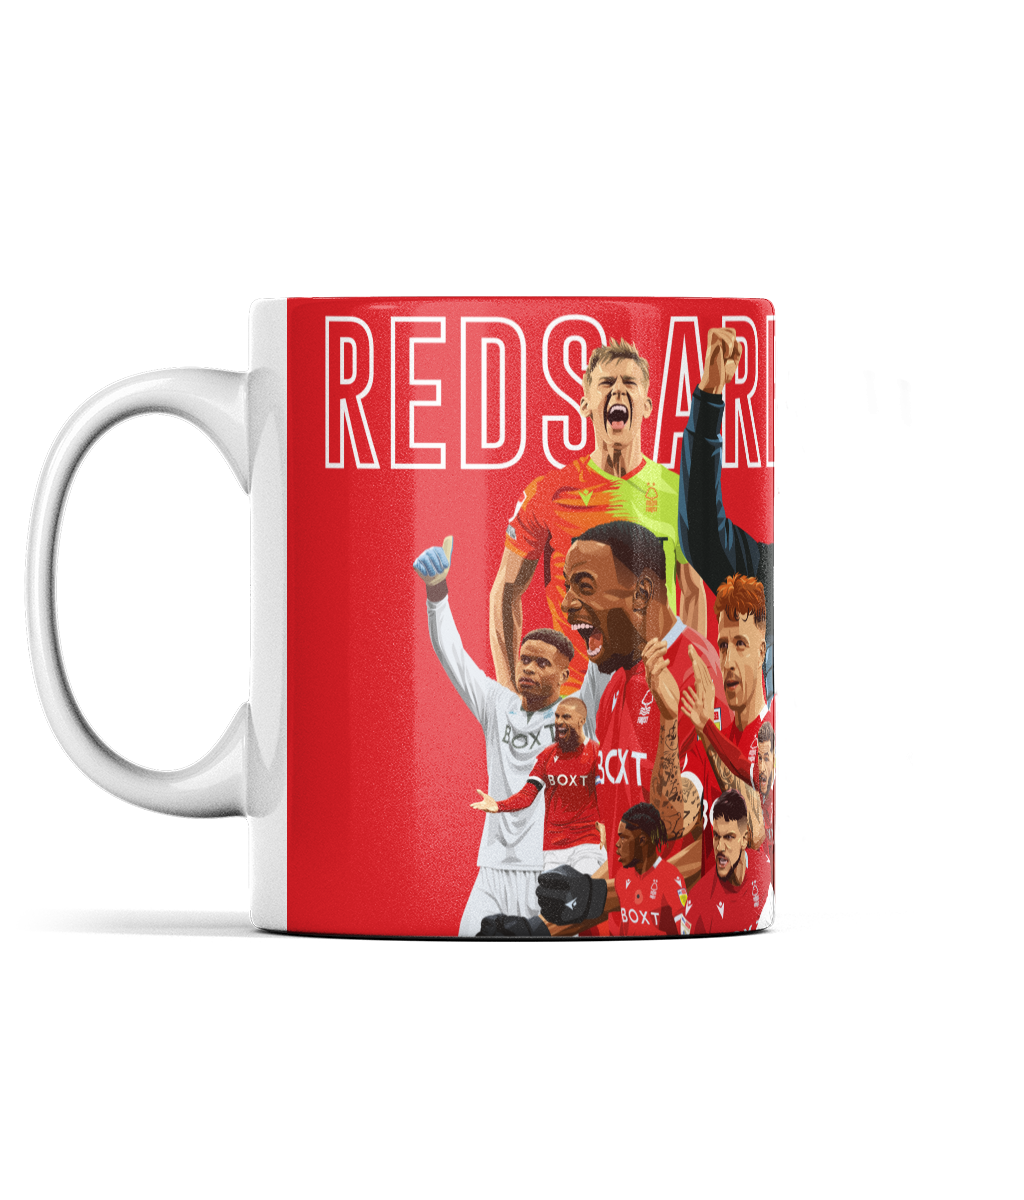 Nottingham Forest Reds are going up Promotion Mug